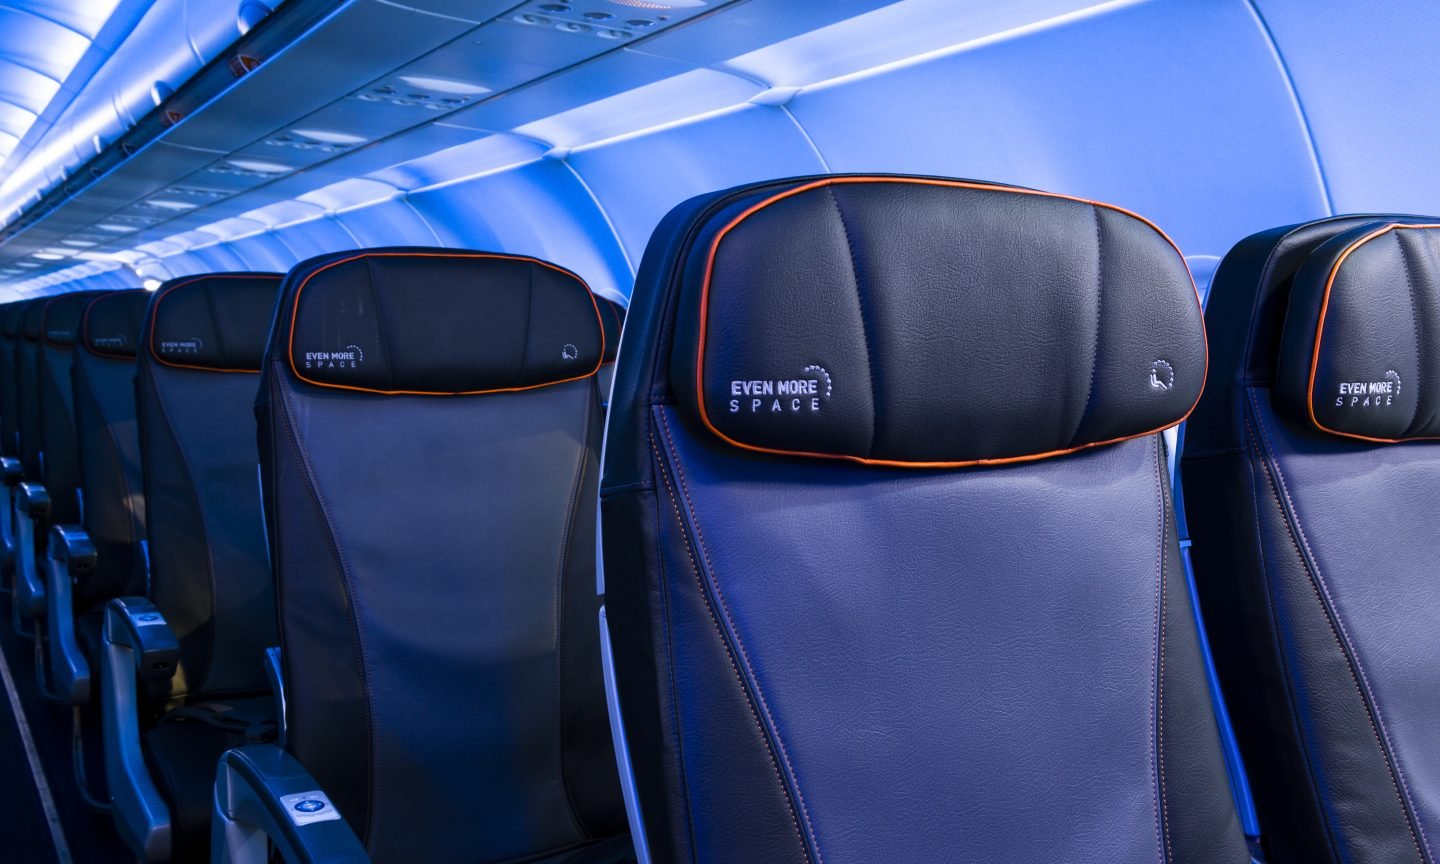 JetBlue Seat Selection: What You Need to Know